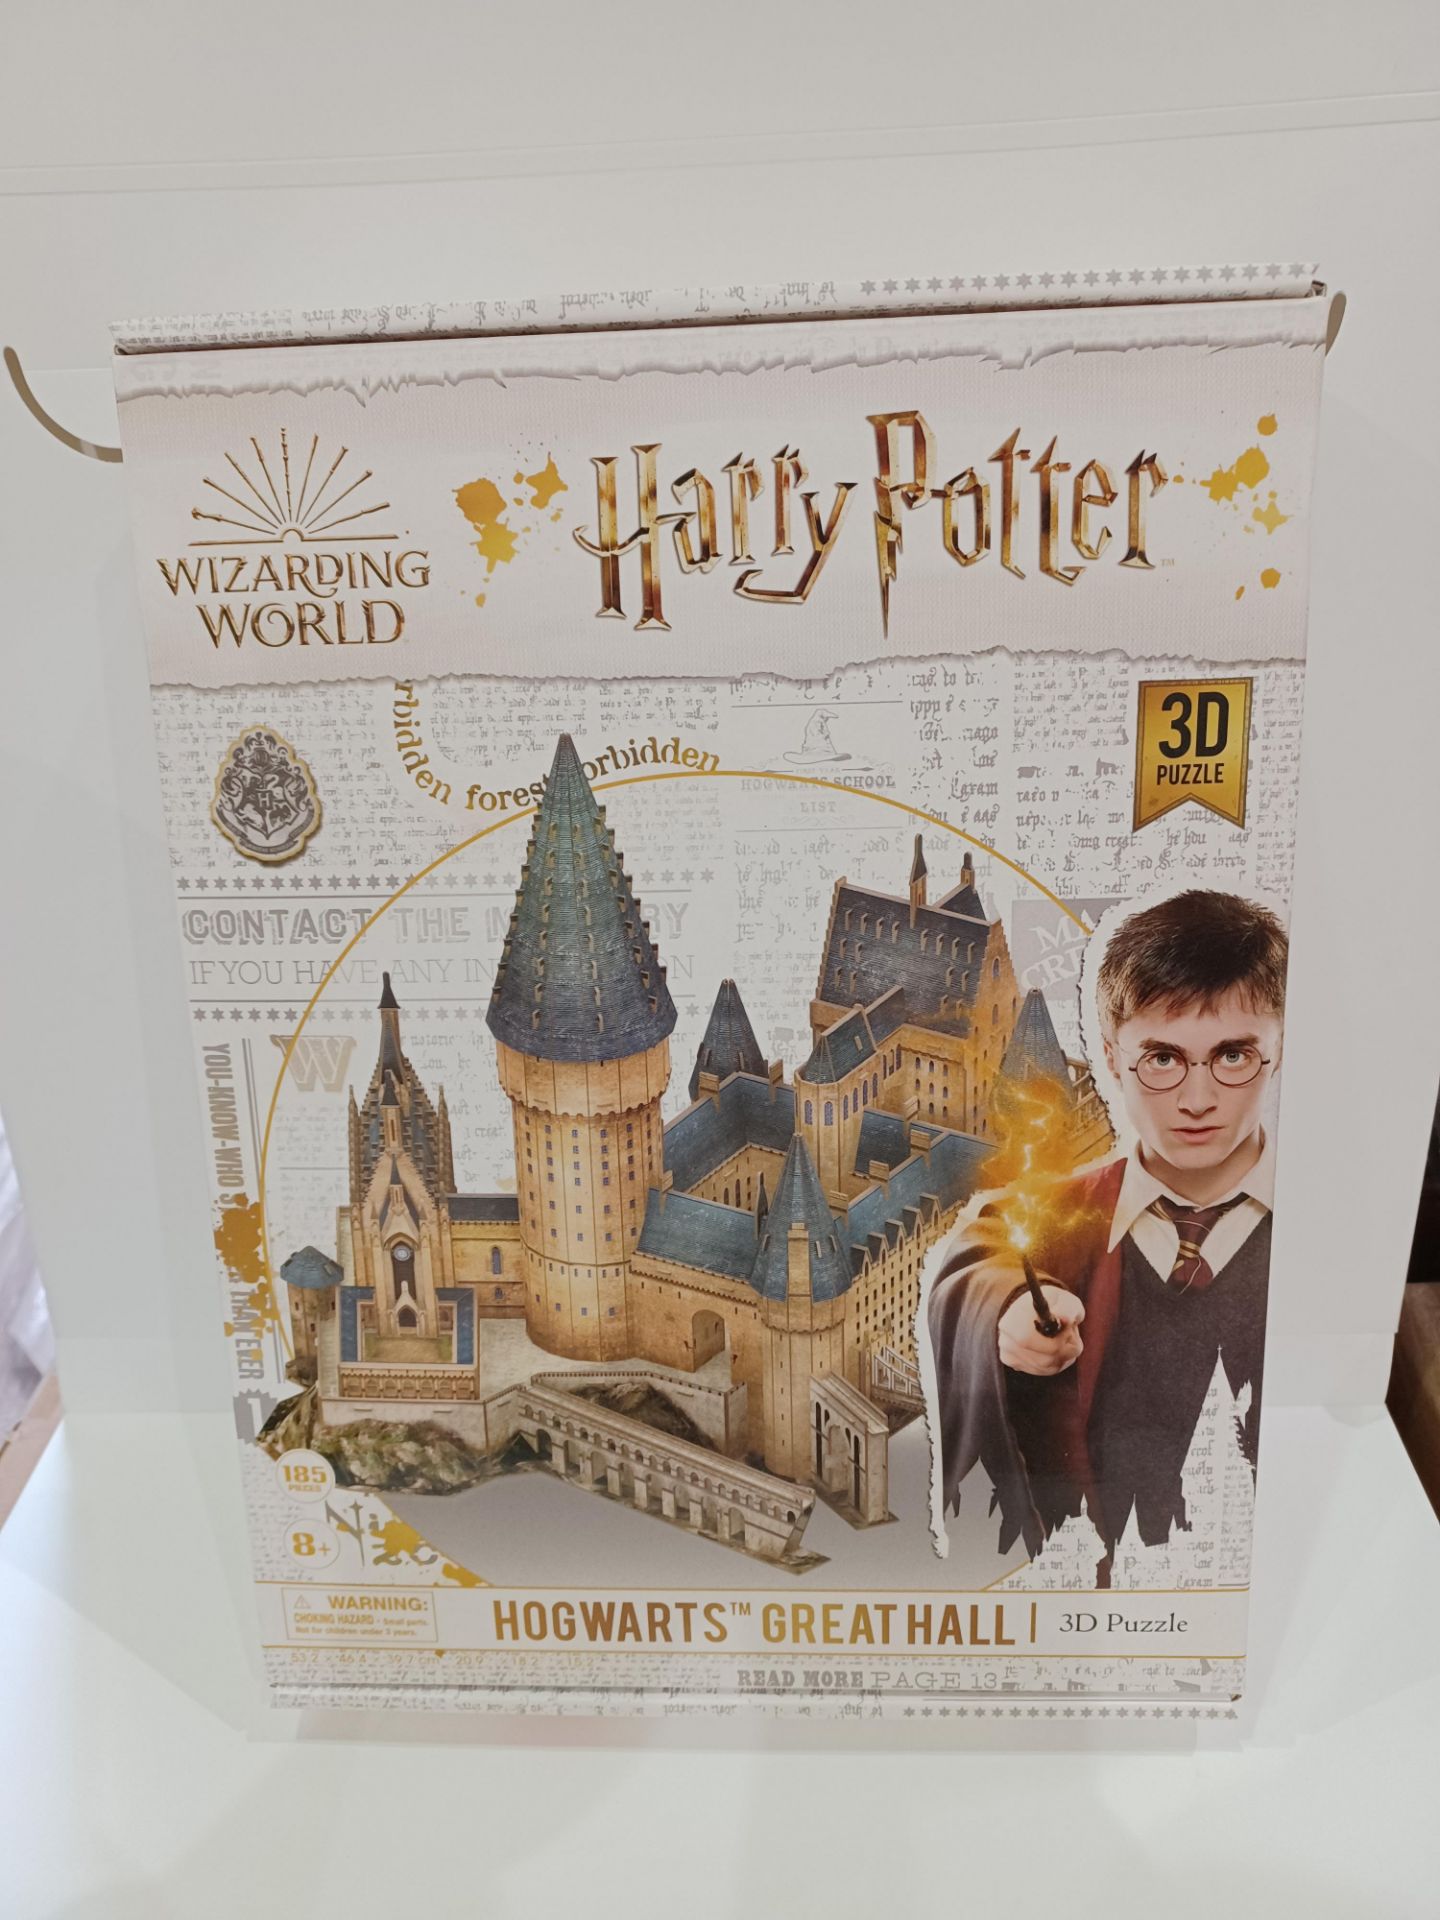 4 X HARRY POTTER WIZARDING WORLD 3D PUZZLE HOGWARTS GREAT HALL - R19